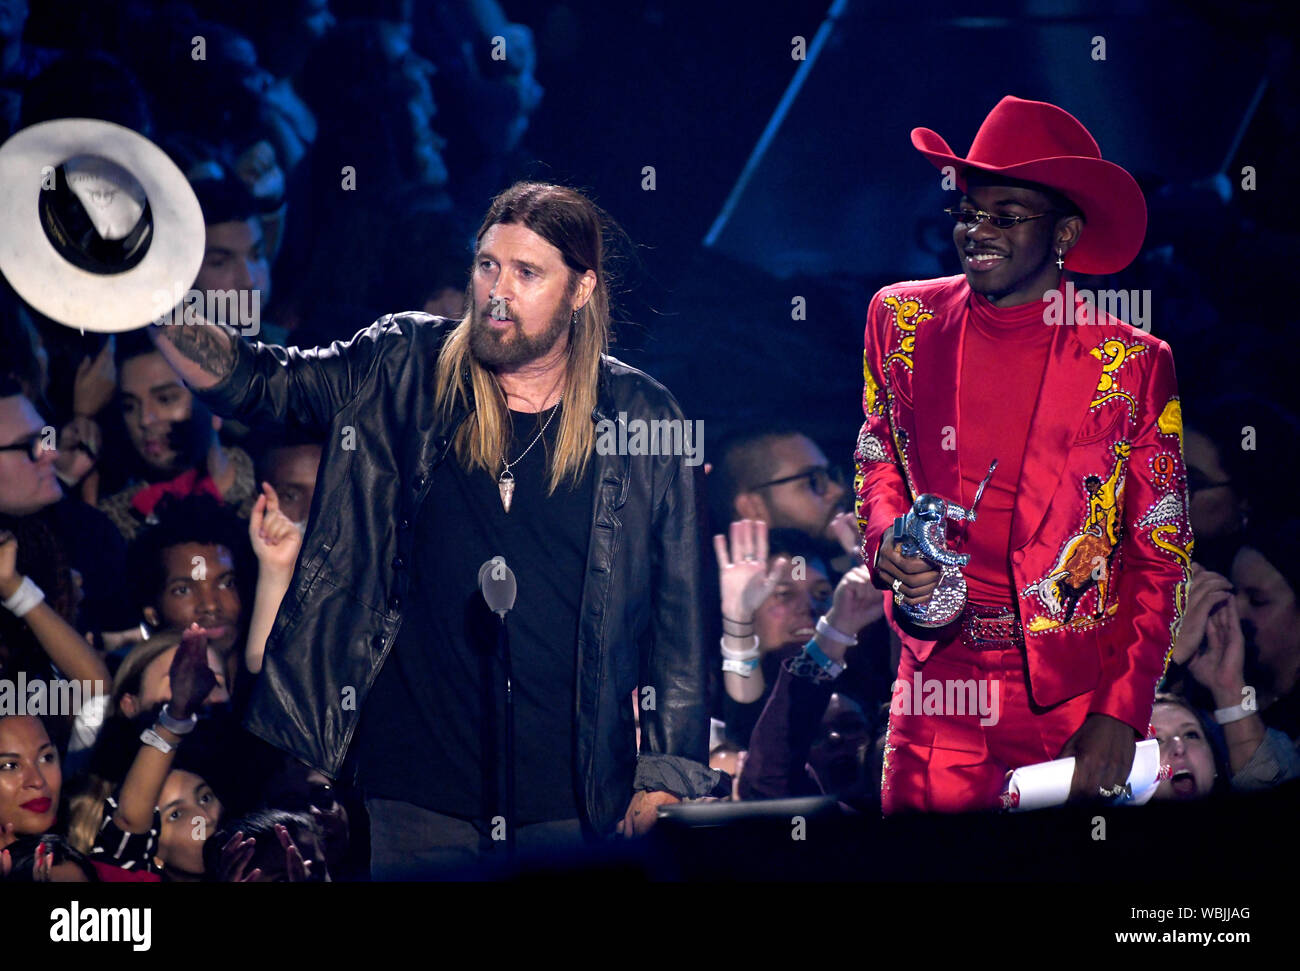 Lil Nas X and Billy Ray Cyrus collecting the award for Song of the Year on  stage at the MTV Video Music Awards 2019 held at the Prudential Center in  Newark, New